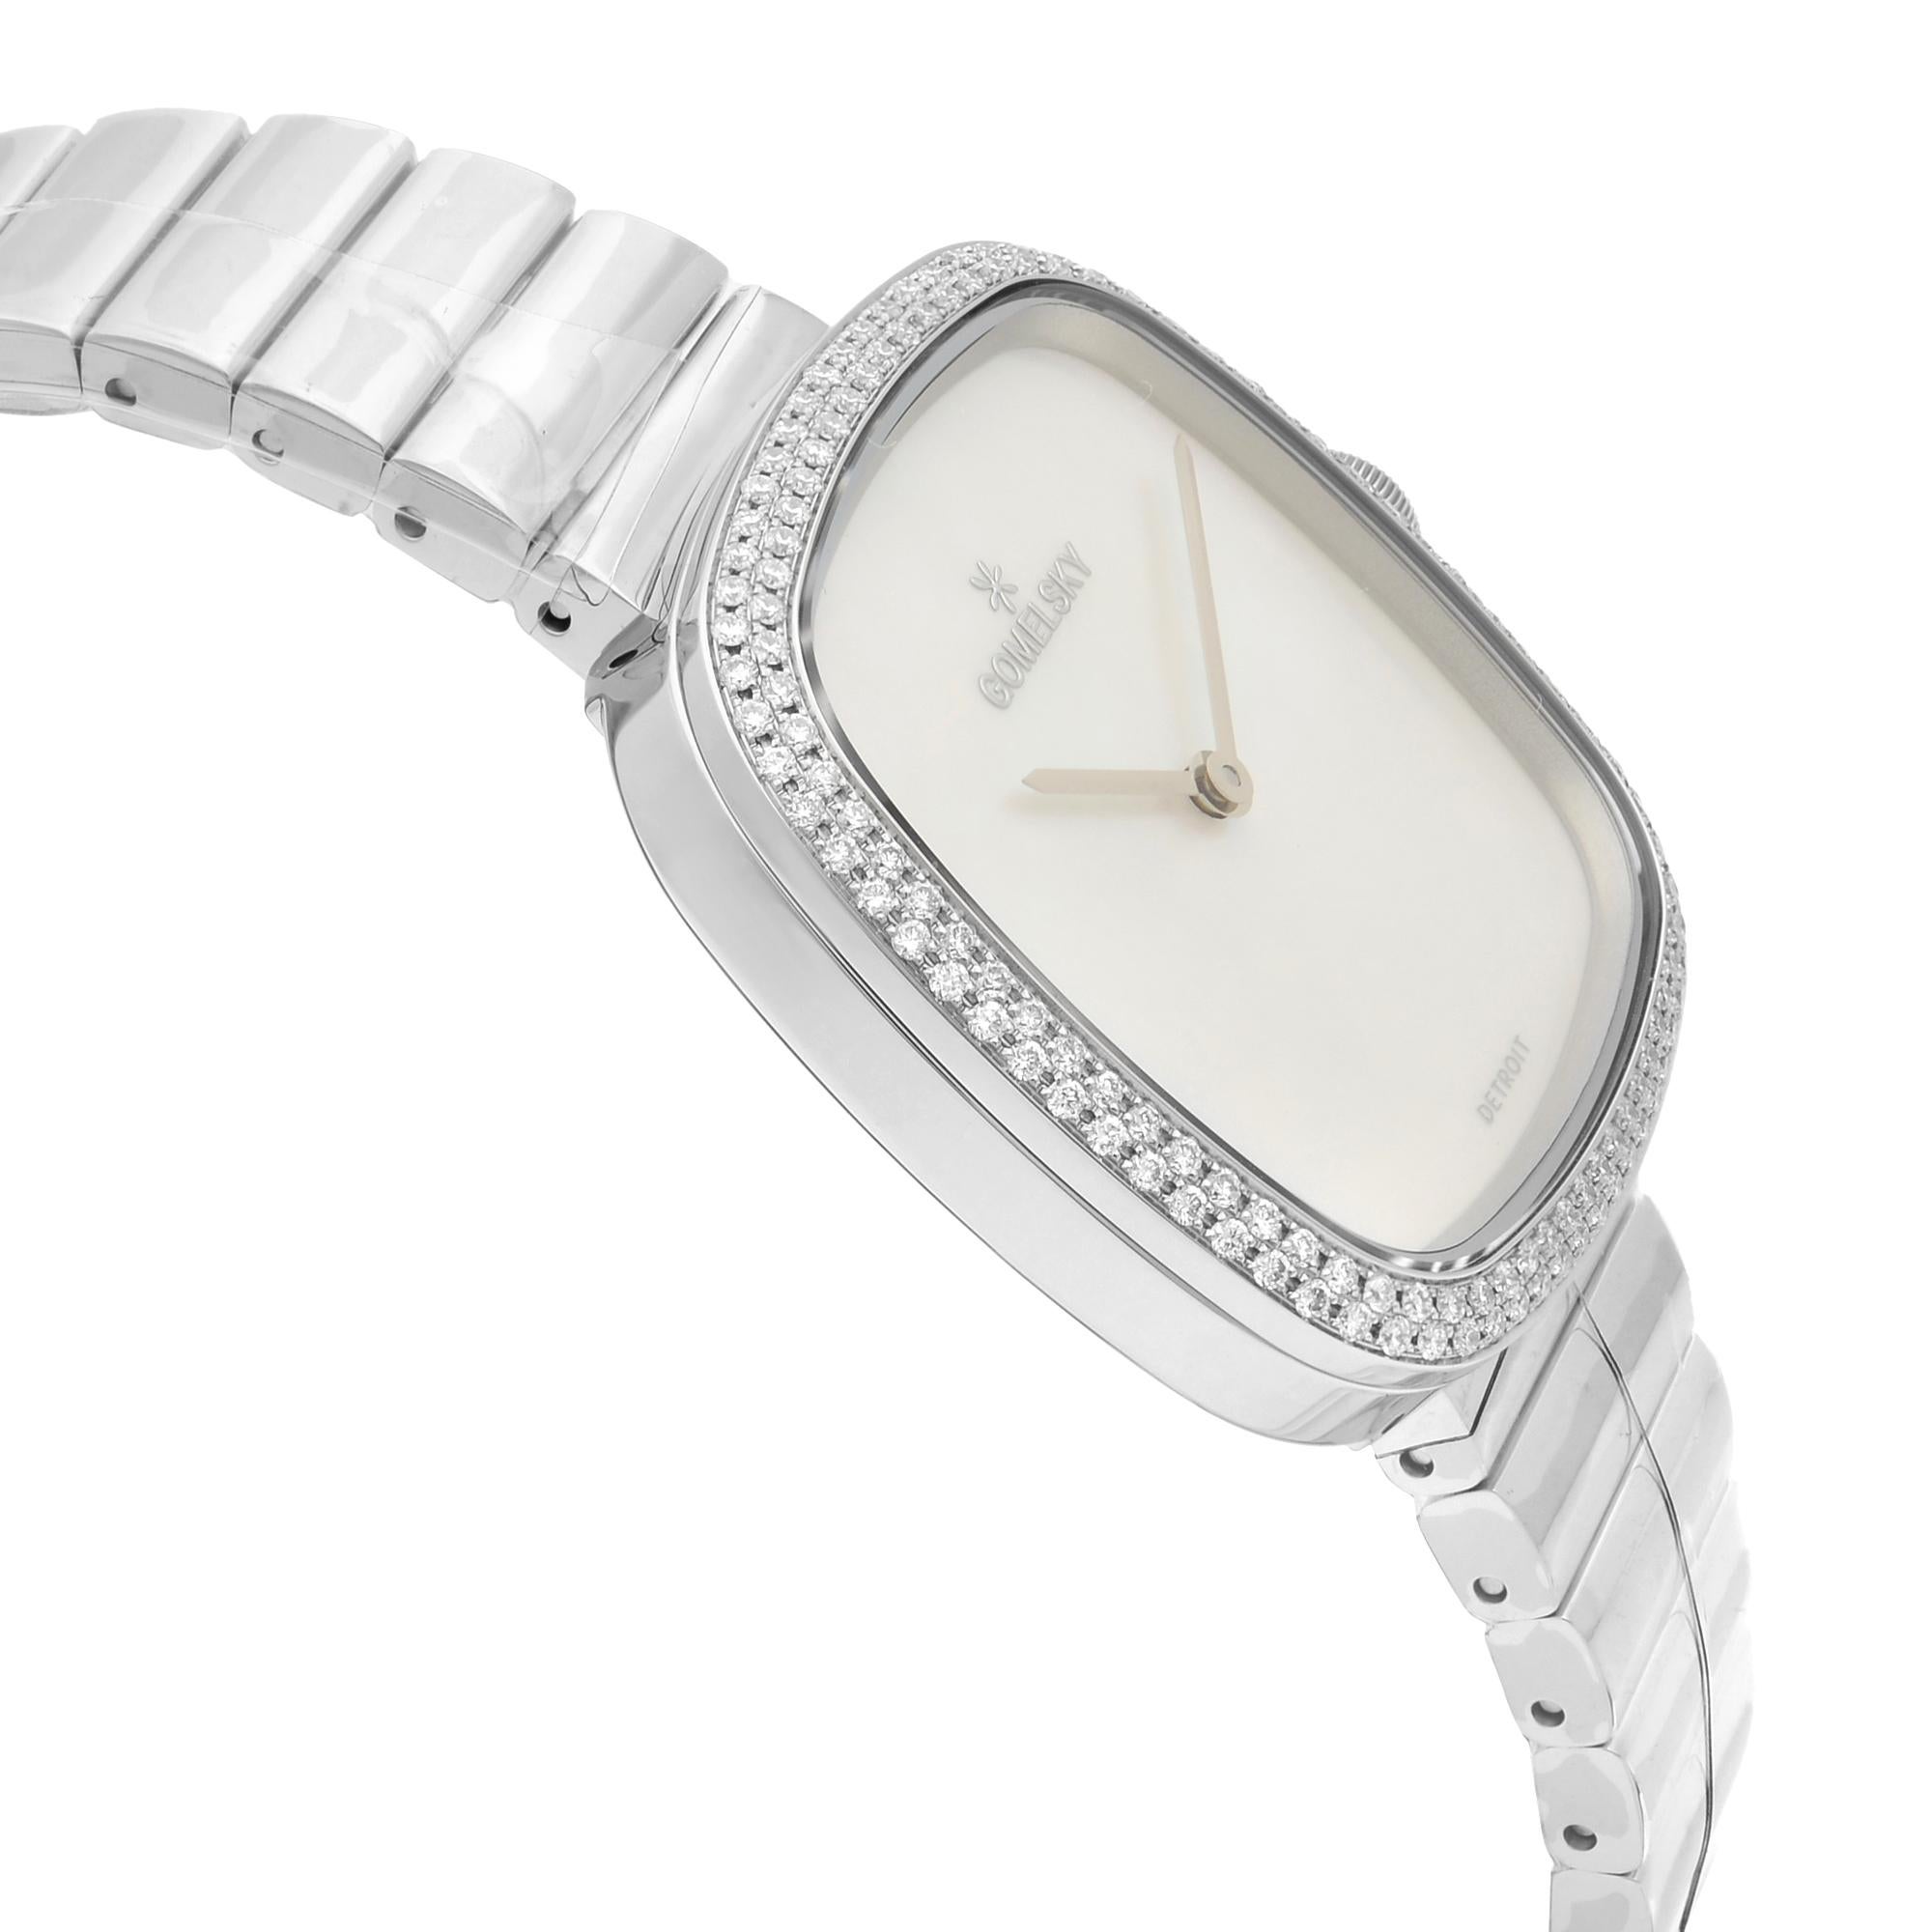 Gomelsky Eppie Sneed Stainless Steel Diamond White Dial Ladies Watch G0120095028 In New Condition For Sale In New York, NY